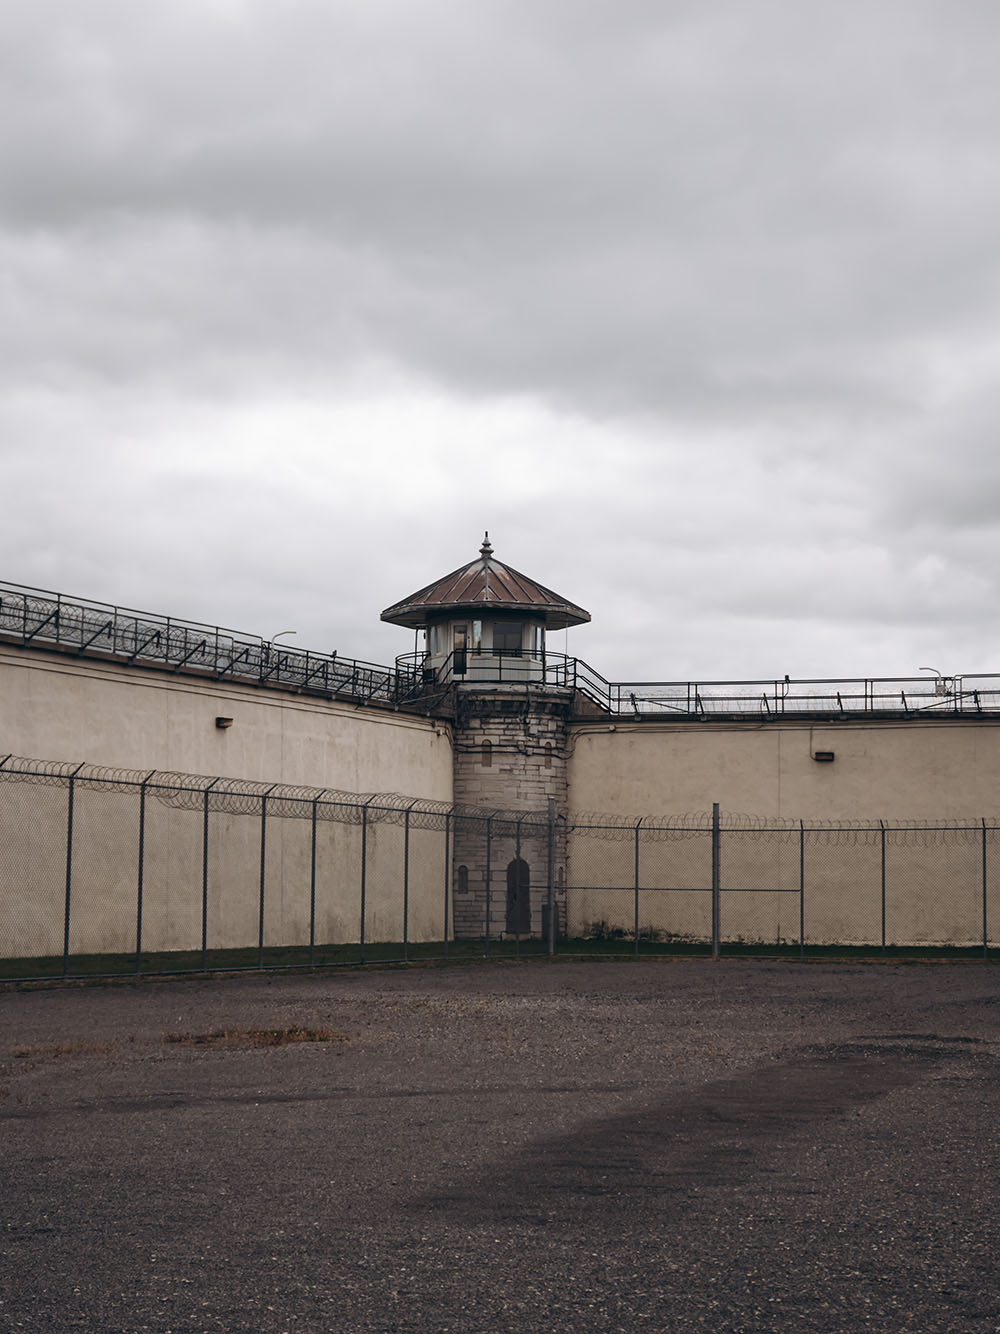 Planning a trip to Kingston, Ontario soon? This guide to the best things to do in Kingston is for you! From the top Kingston activities and attractions, to the must see sights, best restaurants, bars, and everything in between. You won’t want to miss this guide that will help you plan your perfect Kingston getaway. Pictured here: The Kingston Penitentiary Tour